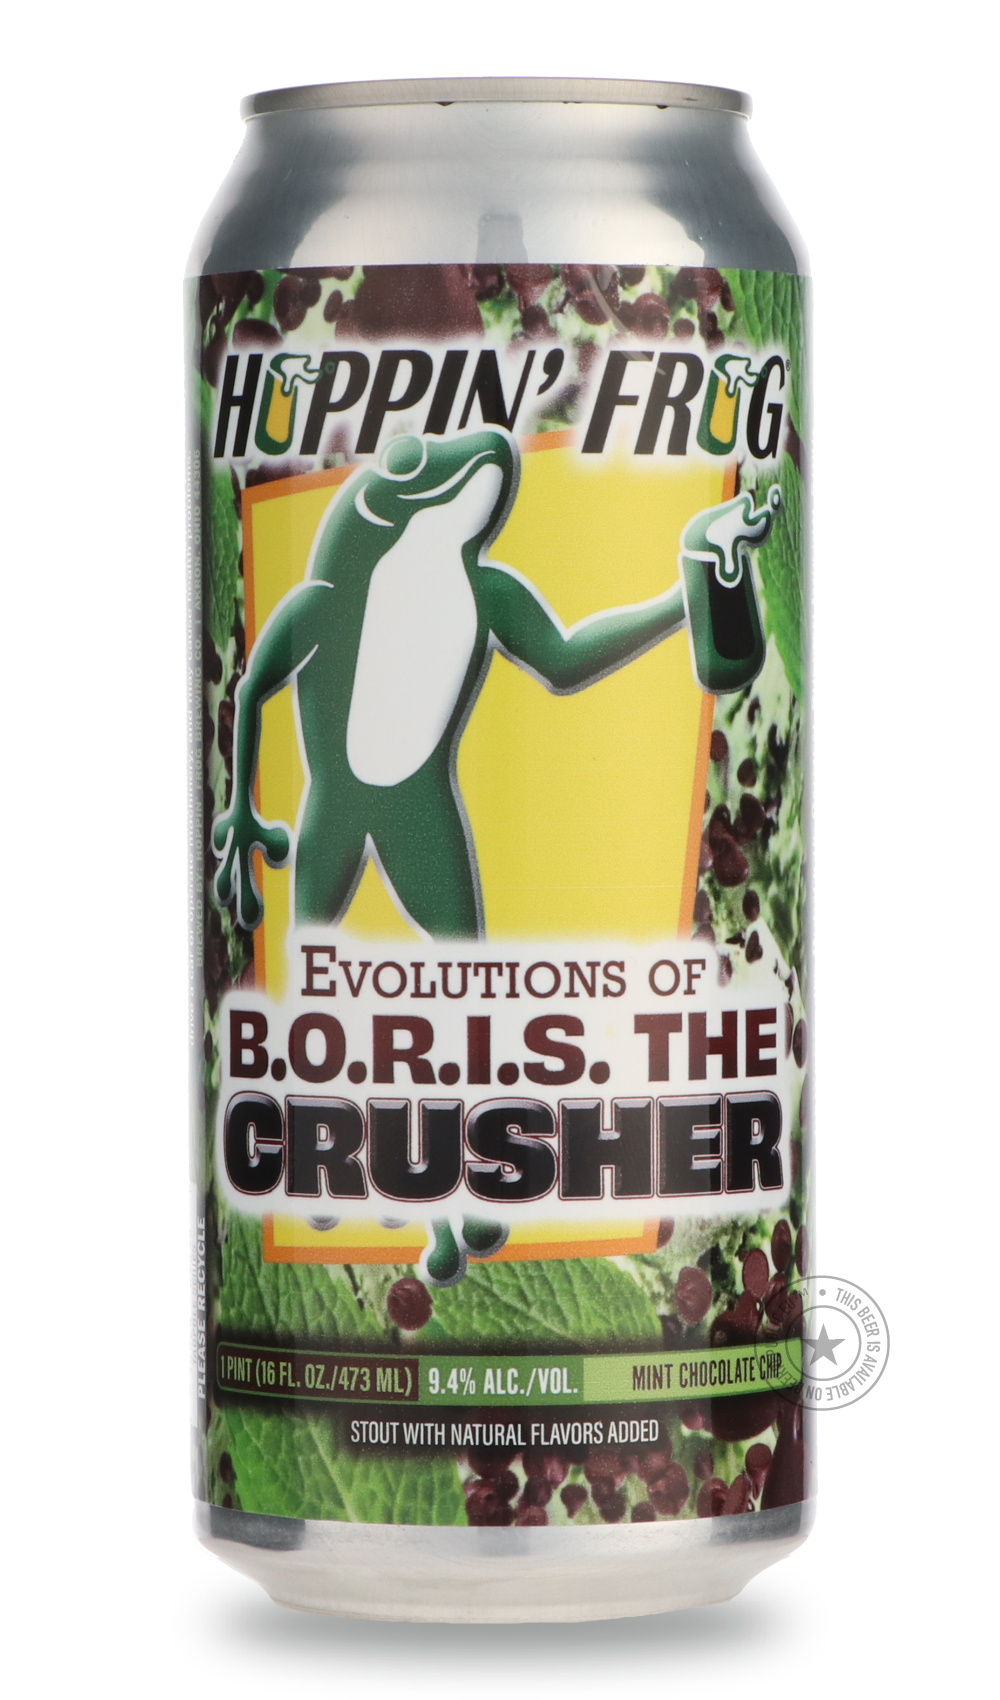 -Hoppin' Frog- Evolutions of B.O.R.I.S. the Crusher Mint Chocolate Chip-Brown & Dark- Only @ Beer Republic - The best online beer store for American & Canadian craft beer - Buy beer online from the USA and Canada - Bier online kopen - Amerikaans bier kopen - Craft beer store - Craft beer kopen - Amerikanisch bier kaufen - Bier online kaufen - Acheter biere online - IPA - Stout - Porter - New England IPA - Hazy IPA - Imperial Stout - Barrel Aged - Barrel Aged Imperial Stout - Brown - Dark beer - Blond - Blon